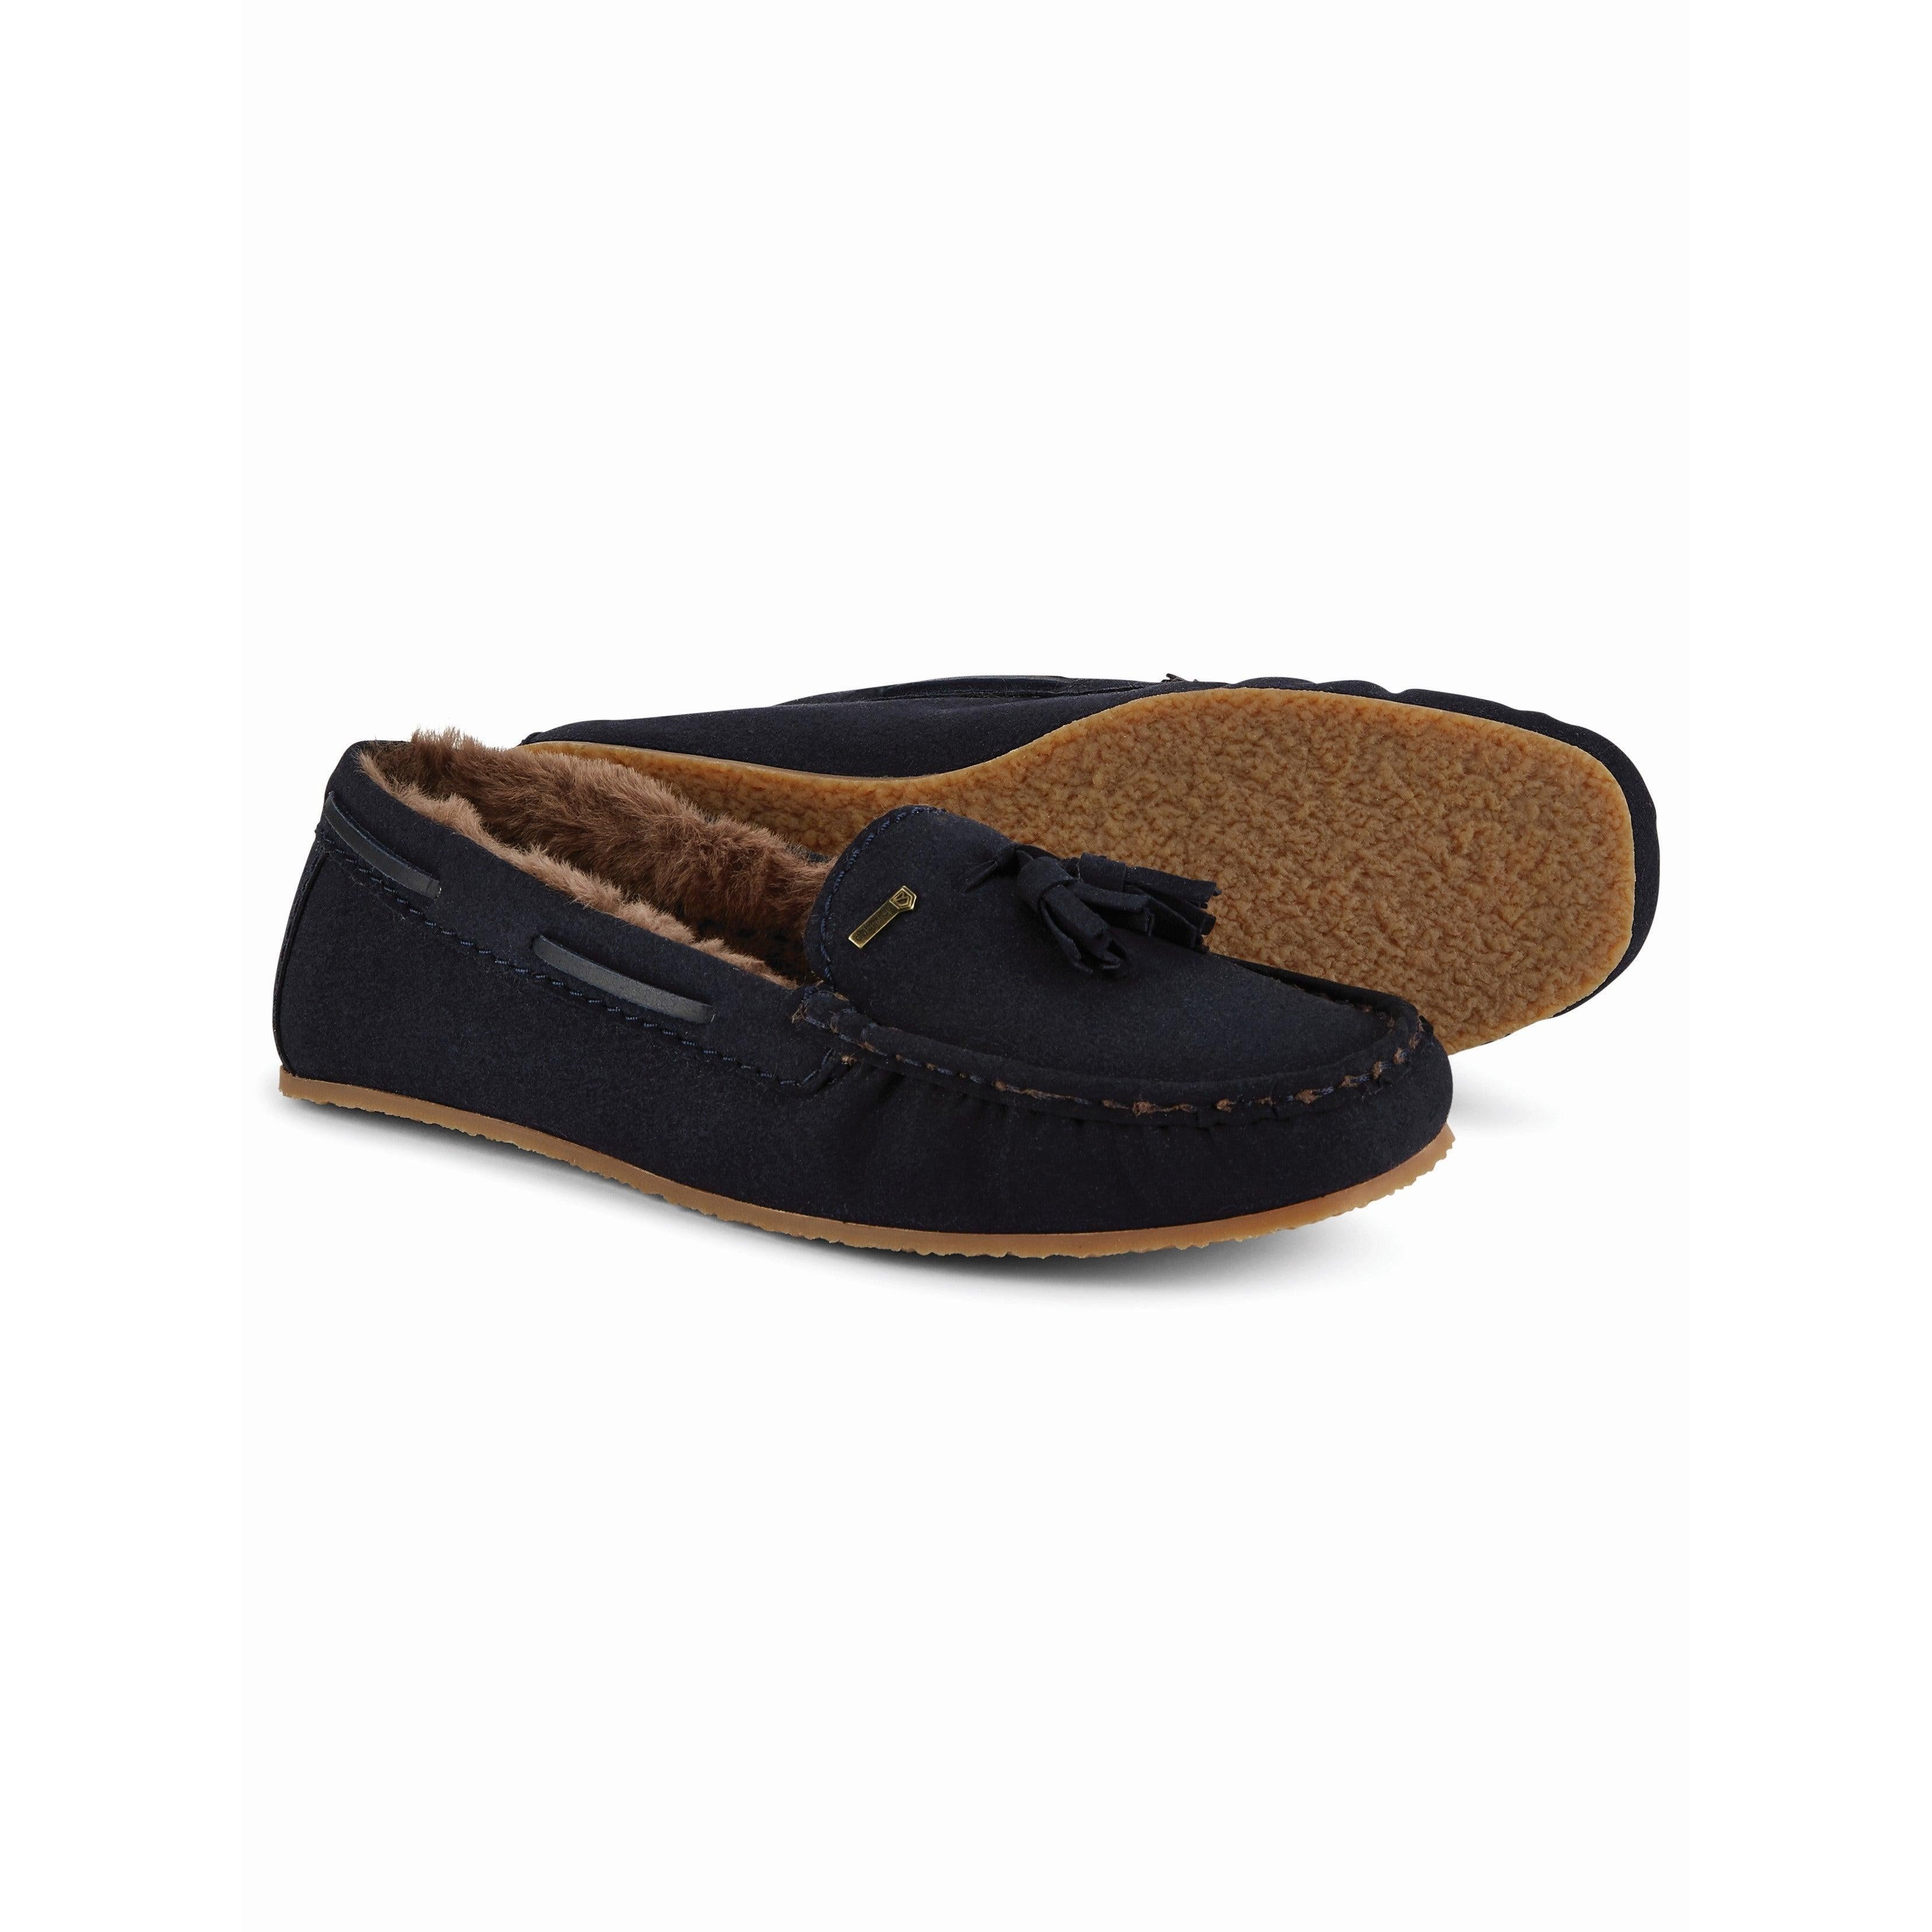 Dubarry Rosslare Ladies Moccasin Slippers - French Navy - William Powell